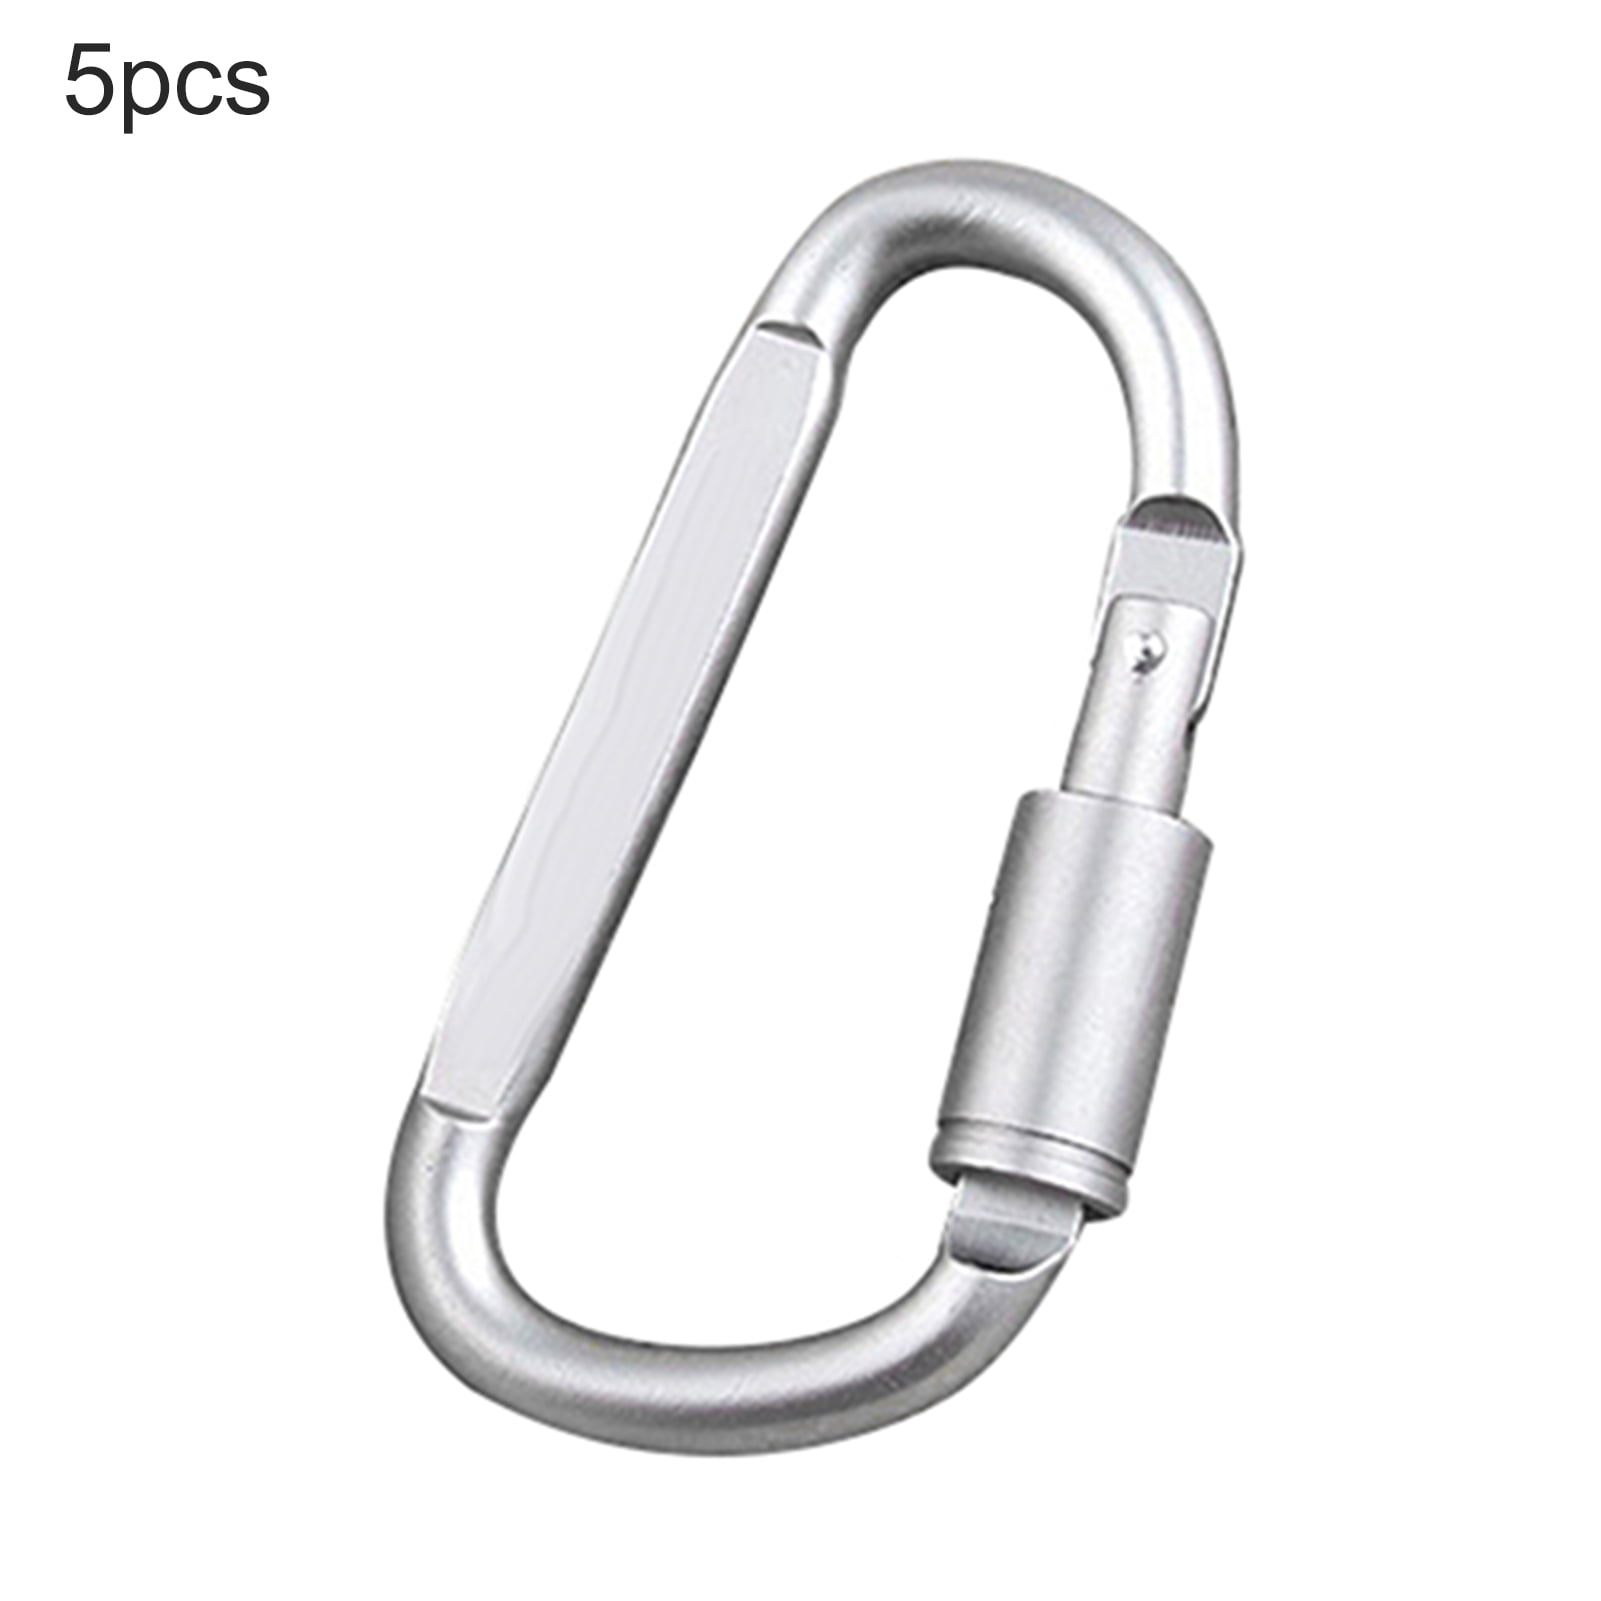 Details about   Aluminum Snap Hook Carabiner D-Ring Key Chain Clip Keychain Hiking Camp Acces 